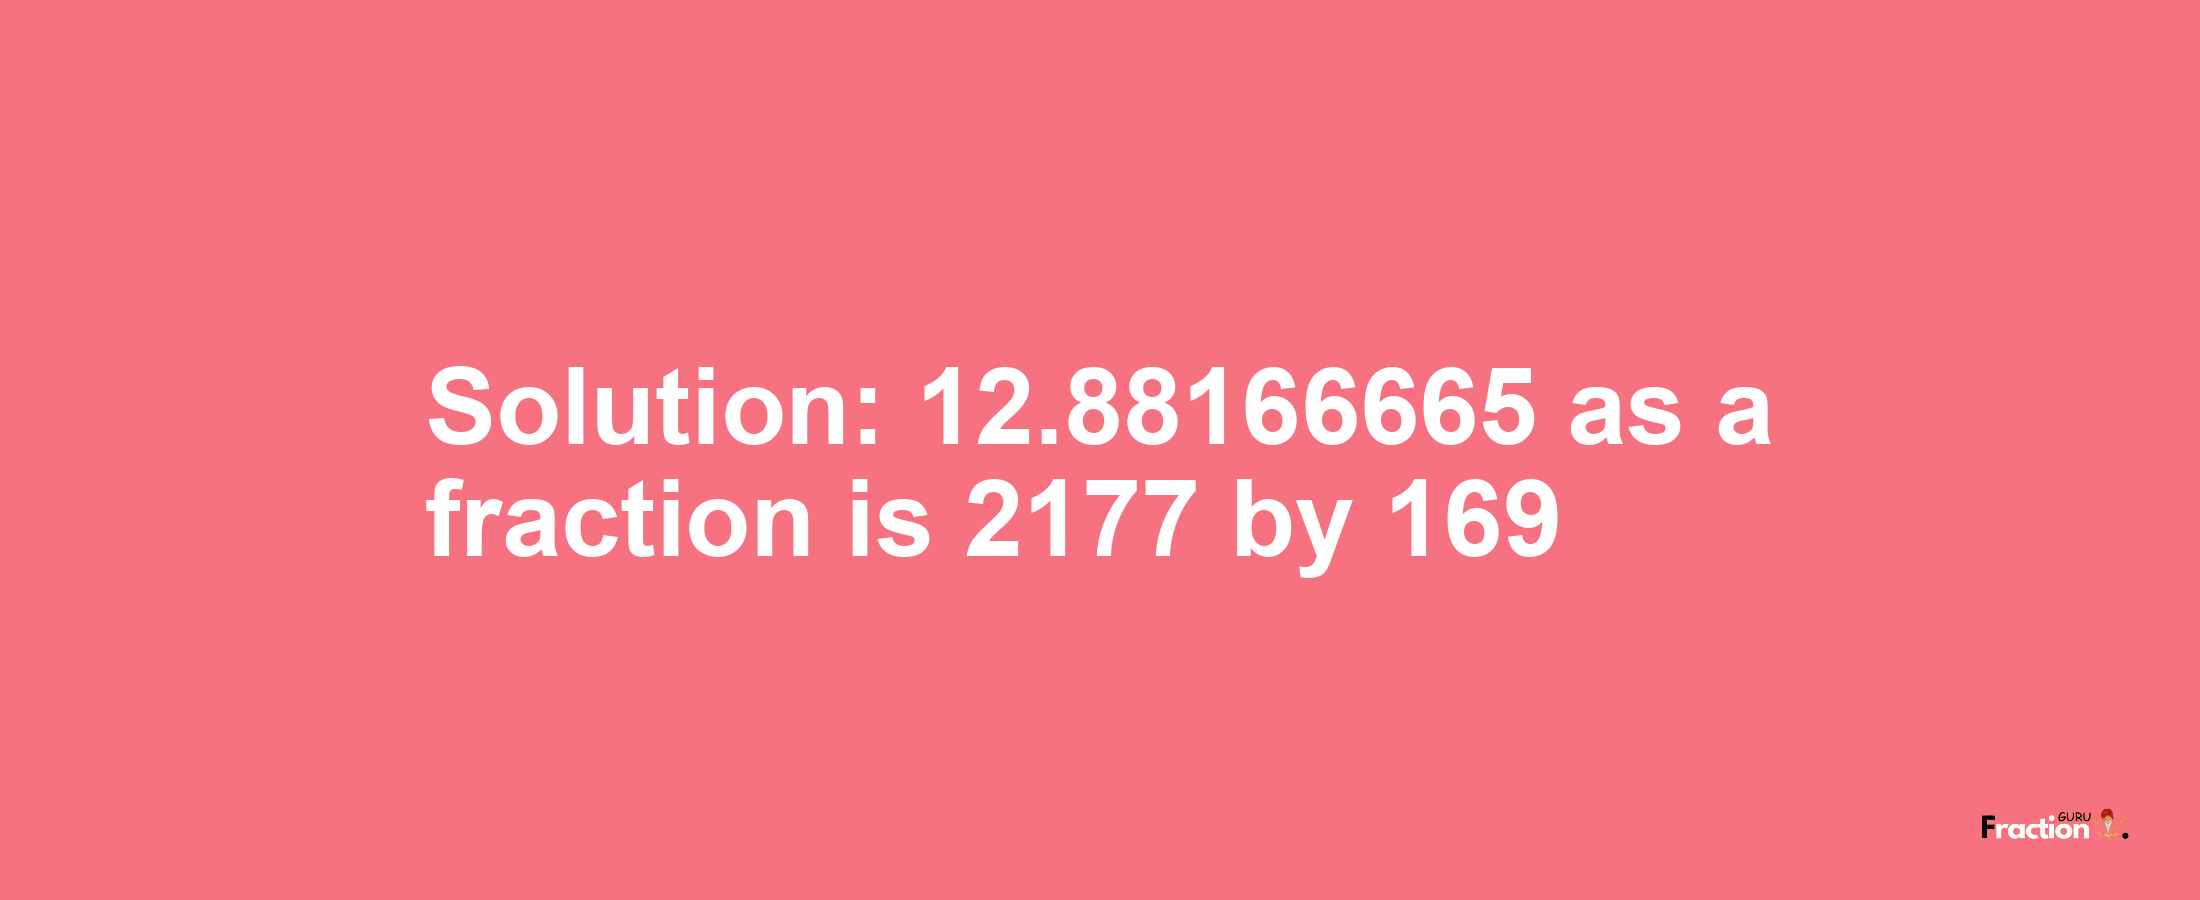 Solution:12.88166665 as a fraction is 2177/169